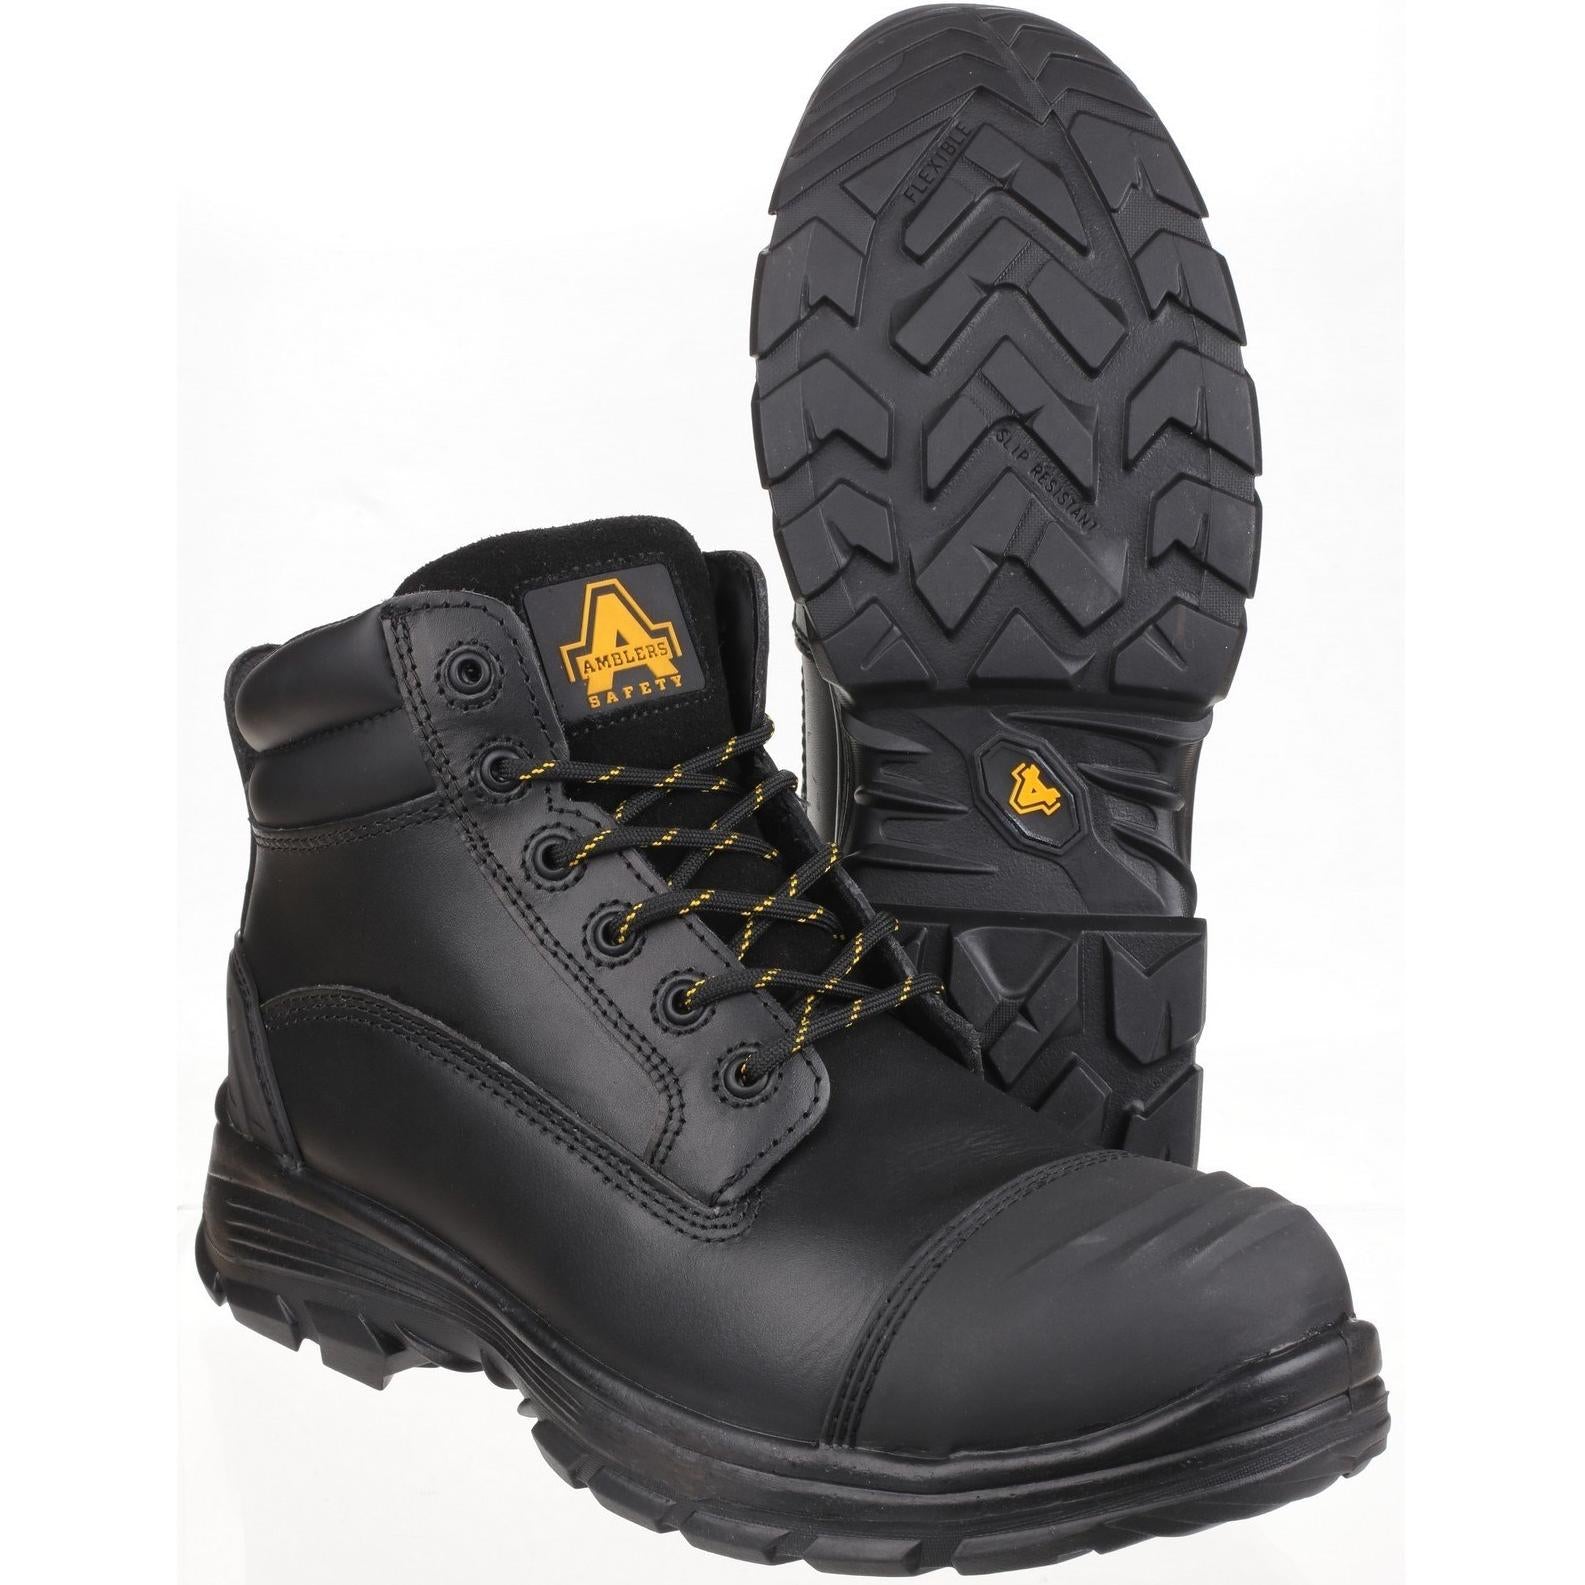 Amblers Safety AS201 QUANTOK S3 PU/RUBBER SAFETY BOOT